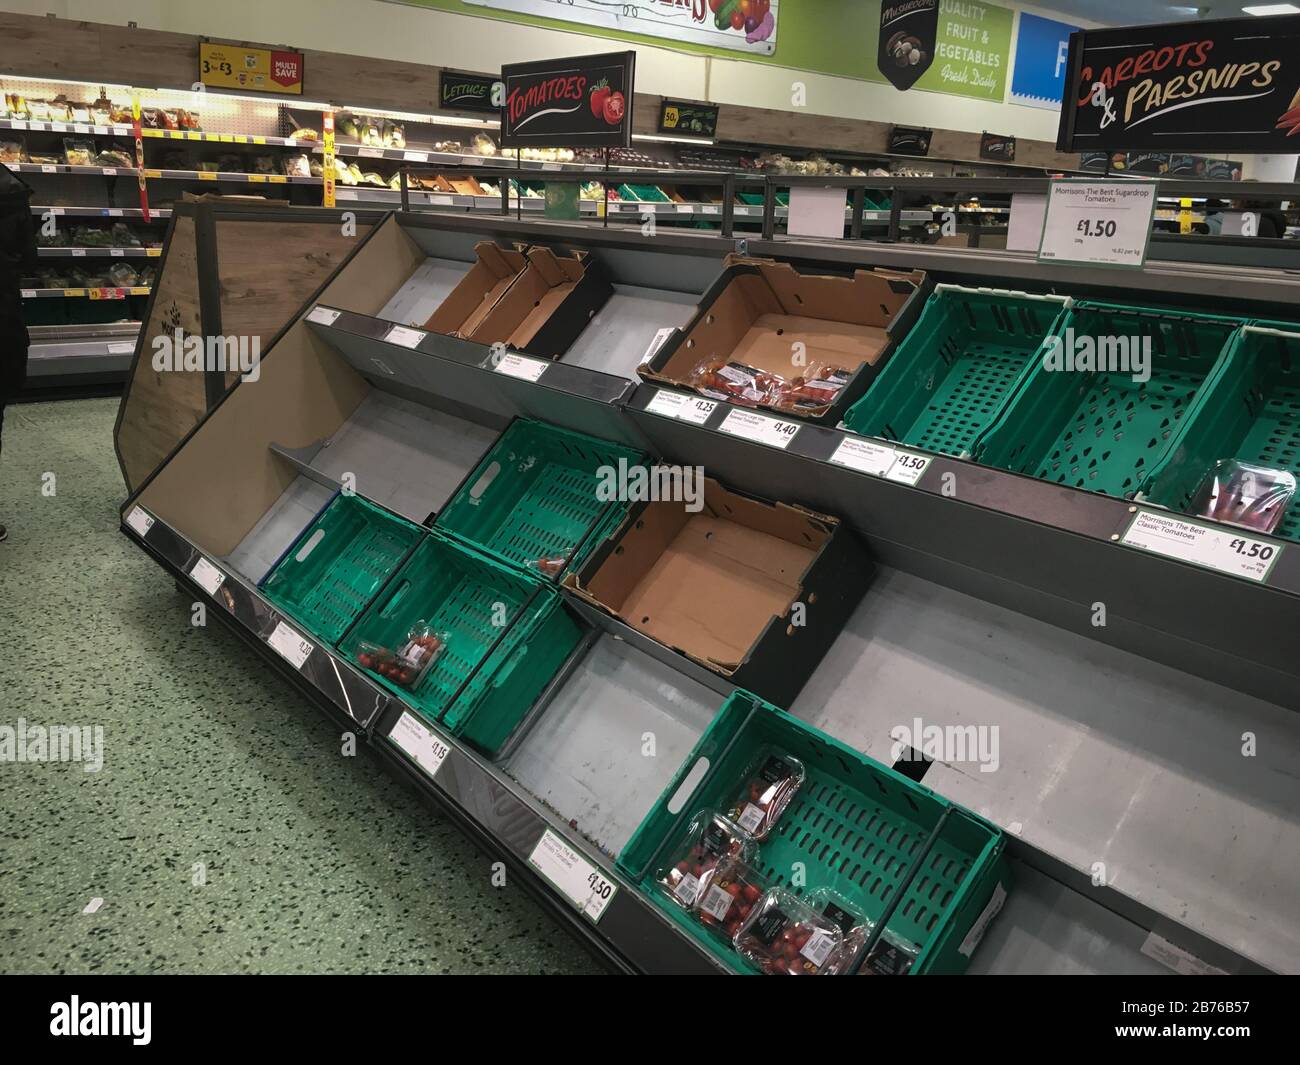 Glasgow, Scotland, 13th March 2020. Empty supermarkets shelves due to people panic buying and stockpiling foods ahead of the expected upturn in cases of Coronavirus Covid-19, in Glasgow, Scotland. Photo credit: Jeremy Sutton-Hibbert/ Alamy Live News. Stock Photo